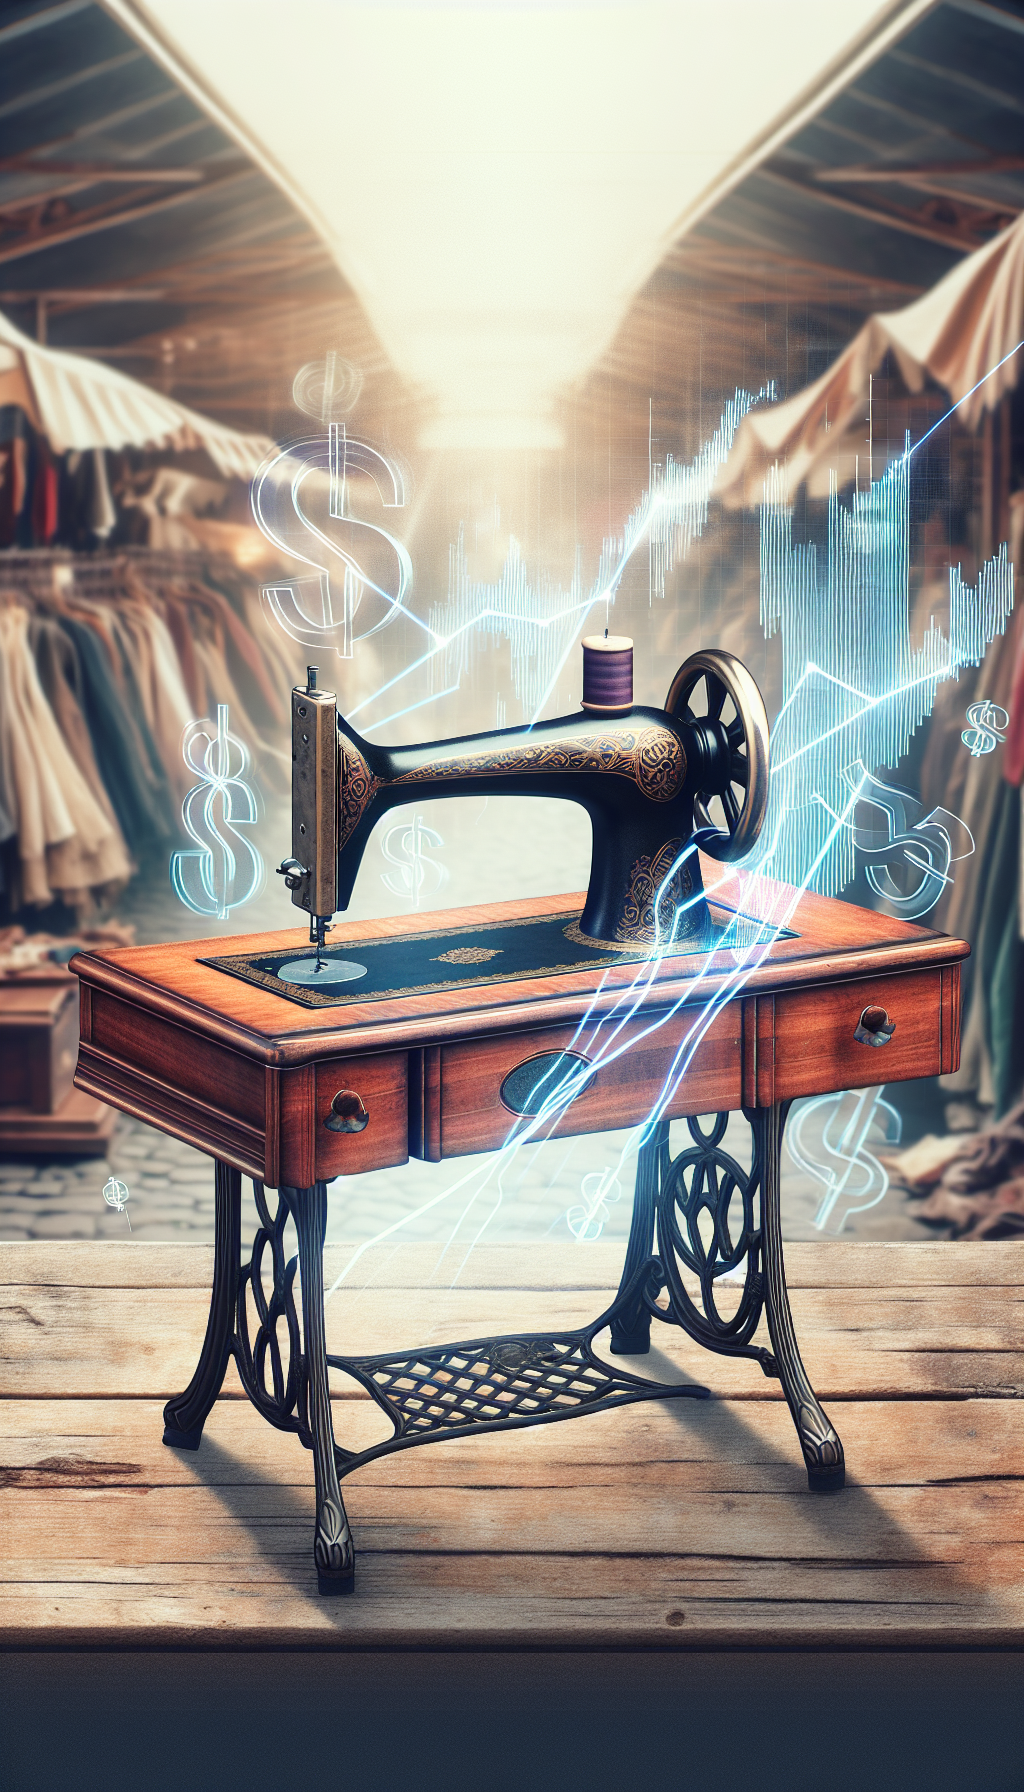 An elegant illustration portrays a half-open antique sewing table with a faded Singer logo, amidst a bustling vintage market scene. Through translucent trend lines and floating dollar signs emerging from the table, the image juxtaposes the warmth of burnished wood with cold analytical graphs, symbolizing the intersection of historical allure and current market valuation.